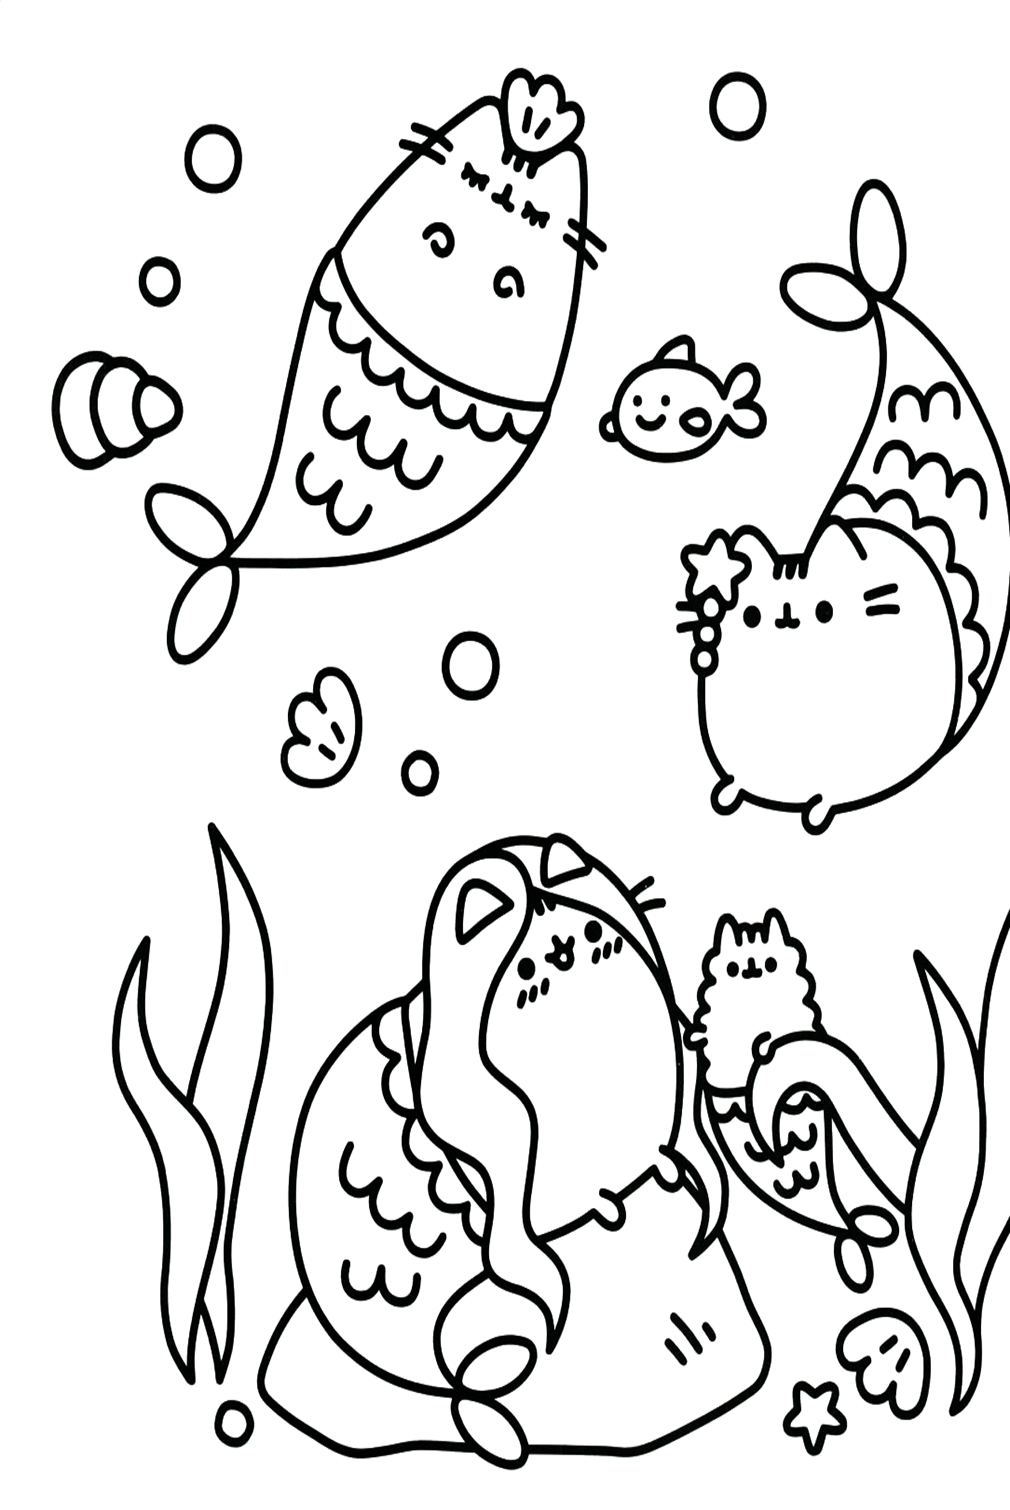 Mermaid Donuts Coloring Page from Donut